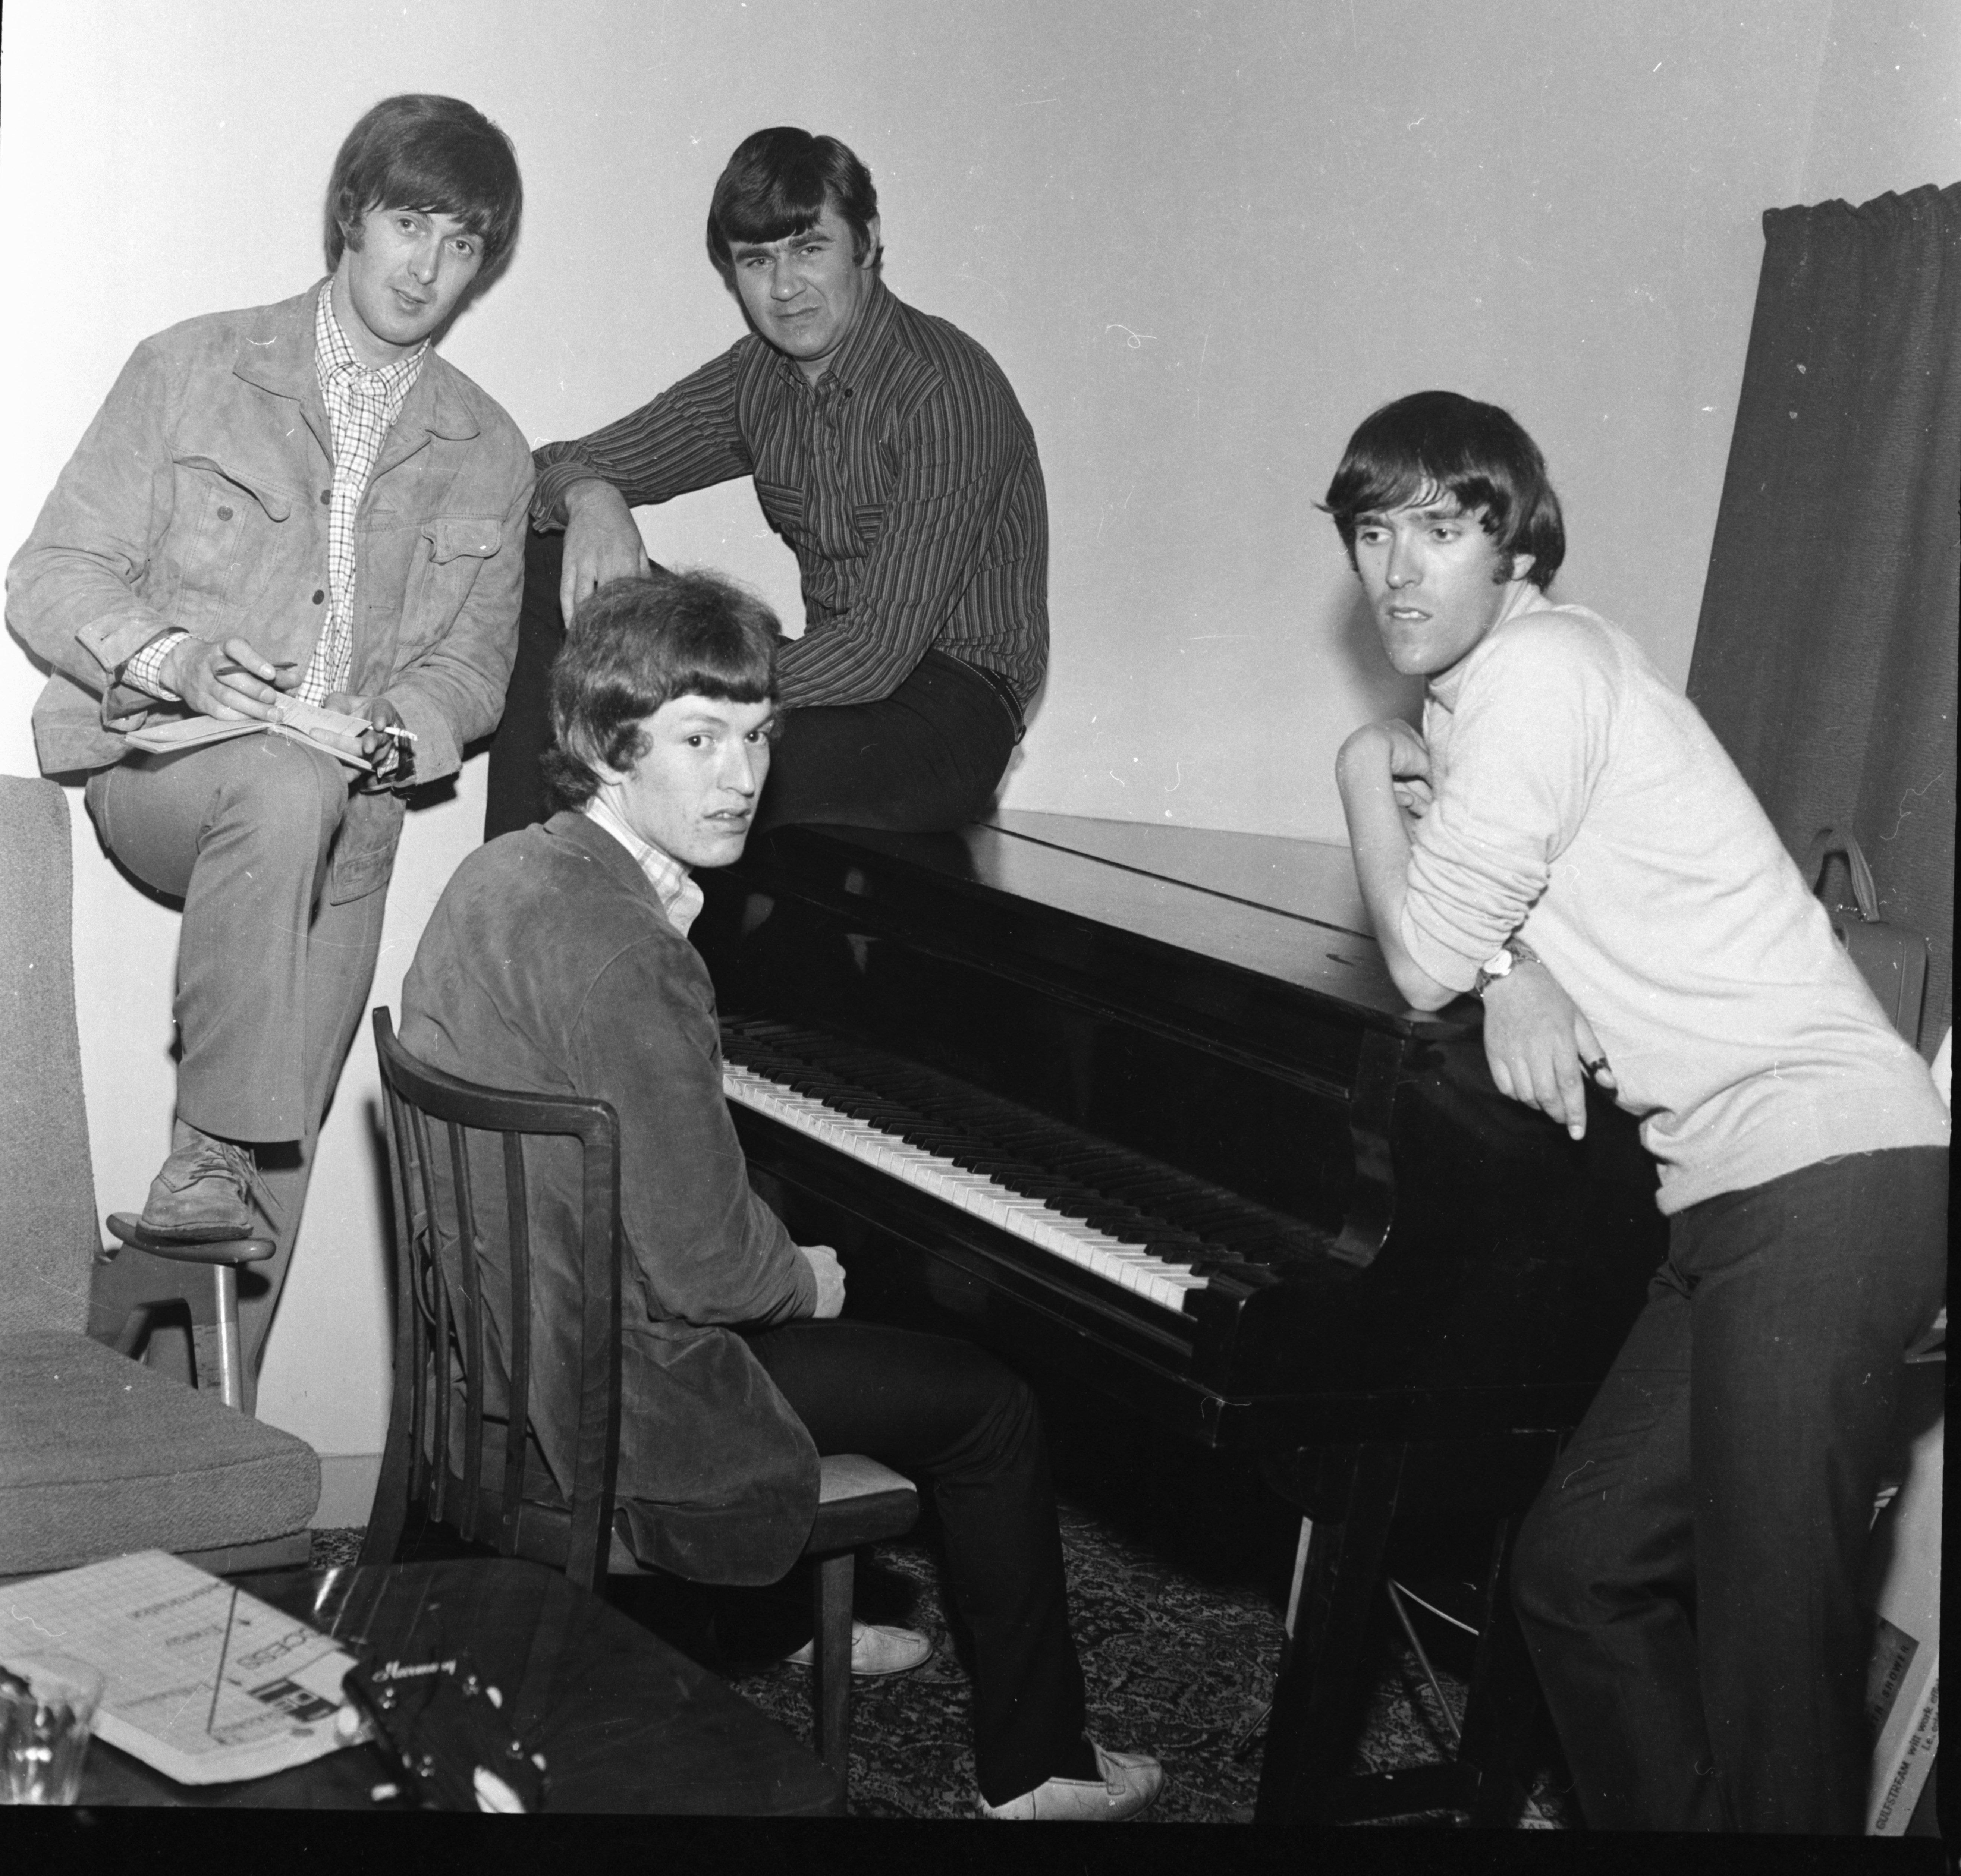 The Spencer Davis Group, fronted by Stevie Winwood was one of the key bands to emerge from the city in the early 1960s. The group's best known songs include the UK No. 1 hits "Keep on Running" and "Somebody Help Me" and the UK and US Top 10 hits "Gimme Some Lovin'" and "I'm a Man"